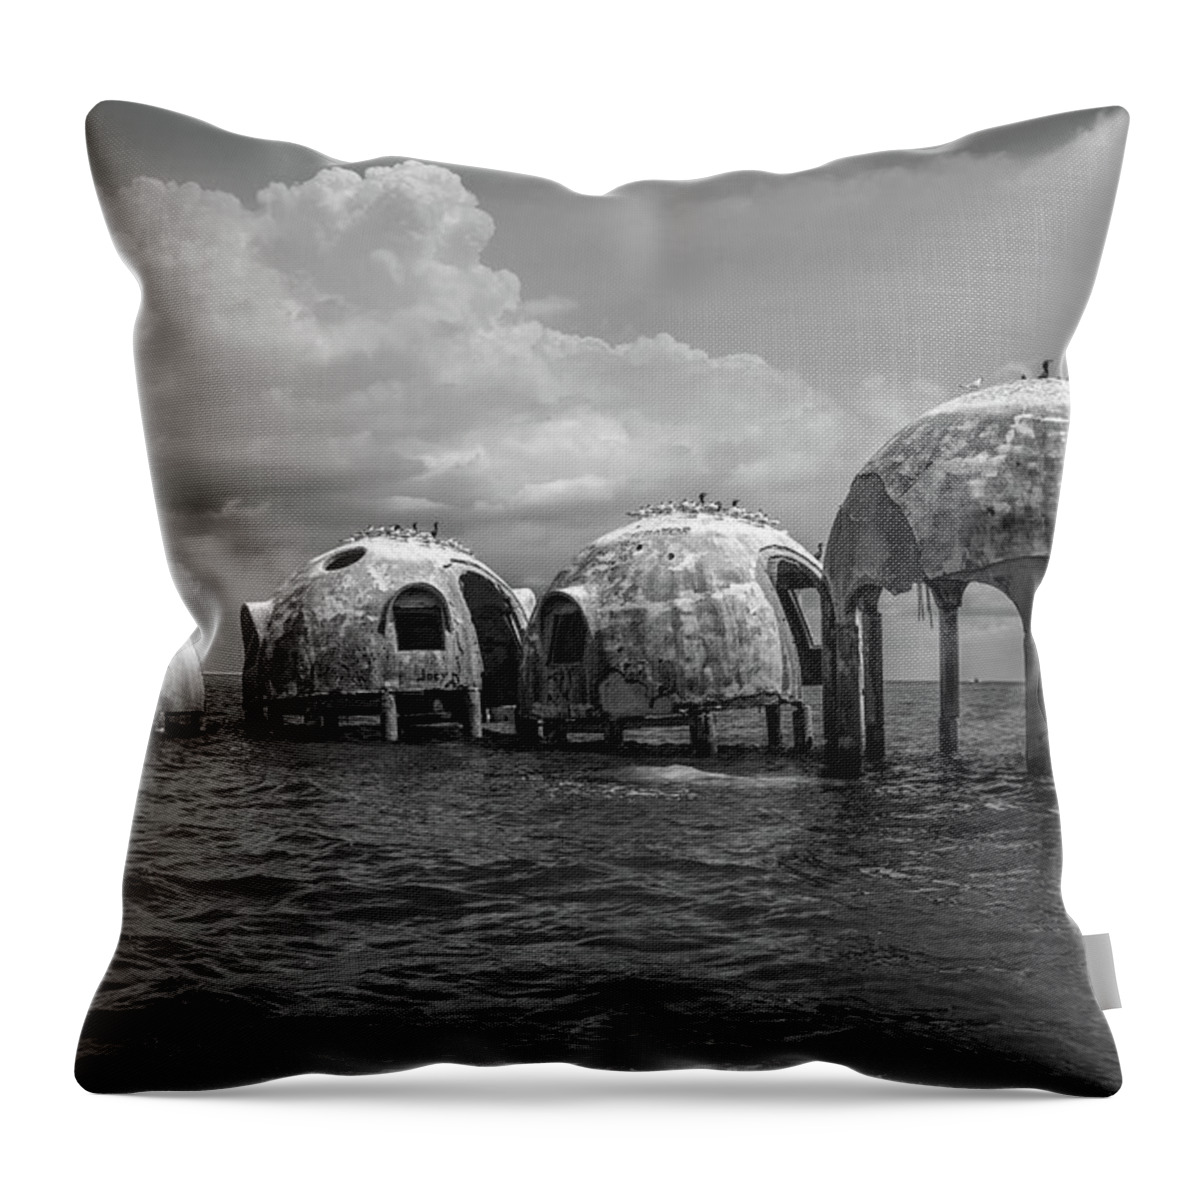 Cape Romano Dome Homes 2019 Throw Pillow featuring the photograph Dome Homes 2019 by Joey Waves